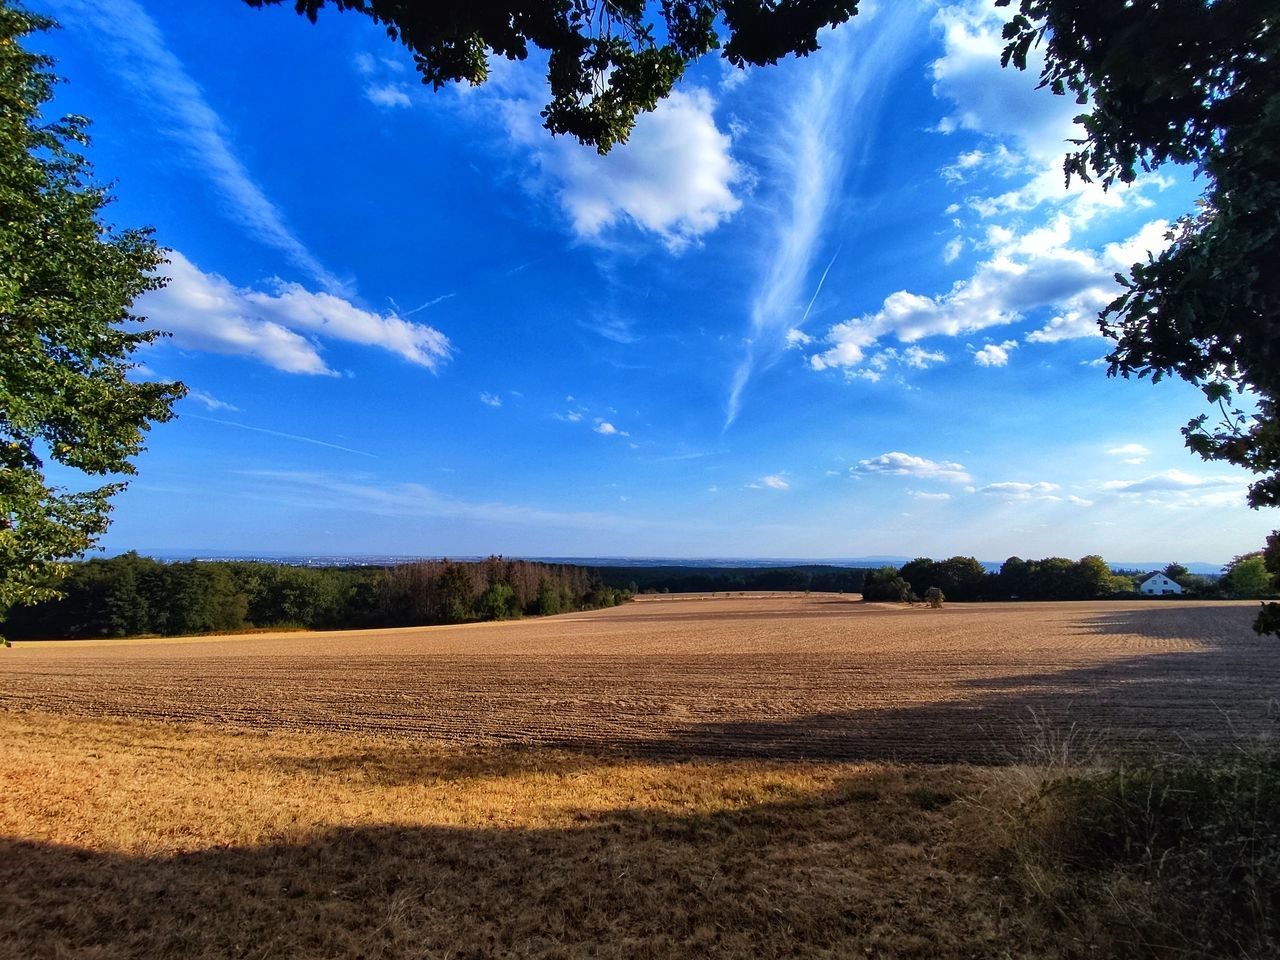 sky, nature, plant, horizon, tree, landscape, cloud, environment, grass, blue, land, sunlight, field, beauty in nature, scenics - nature, morning, no people, rural area, tranquility, rural scene, outdoors, dusk, tranquil scene, summer, non-urban scene, day